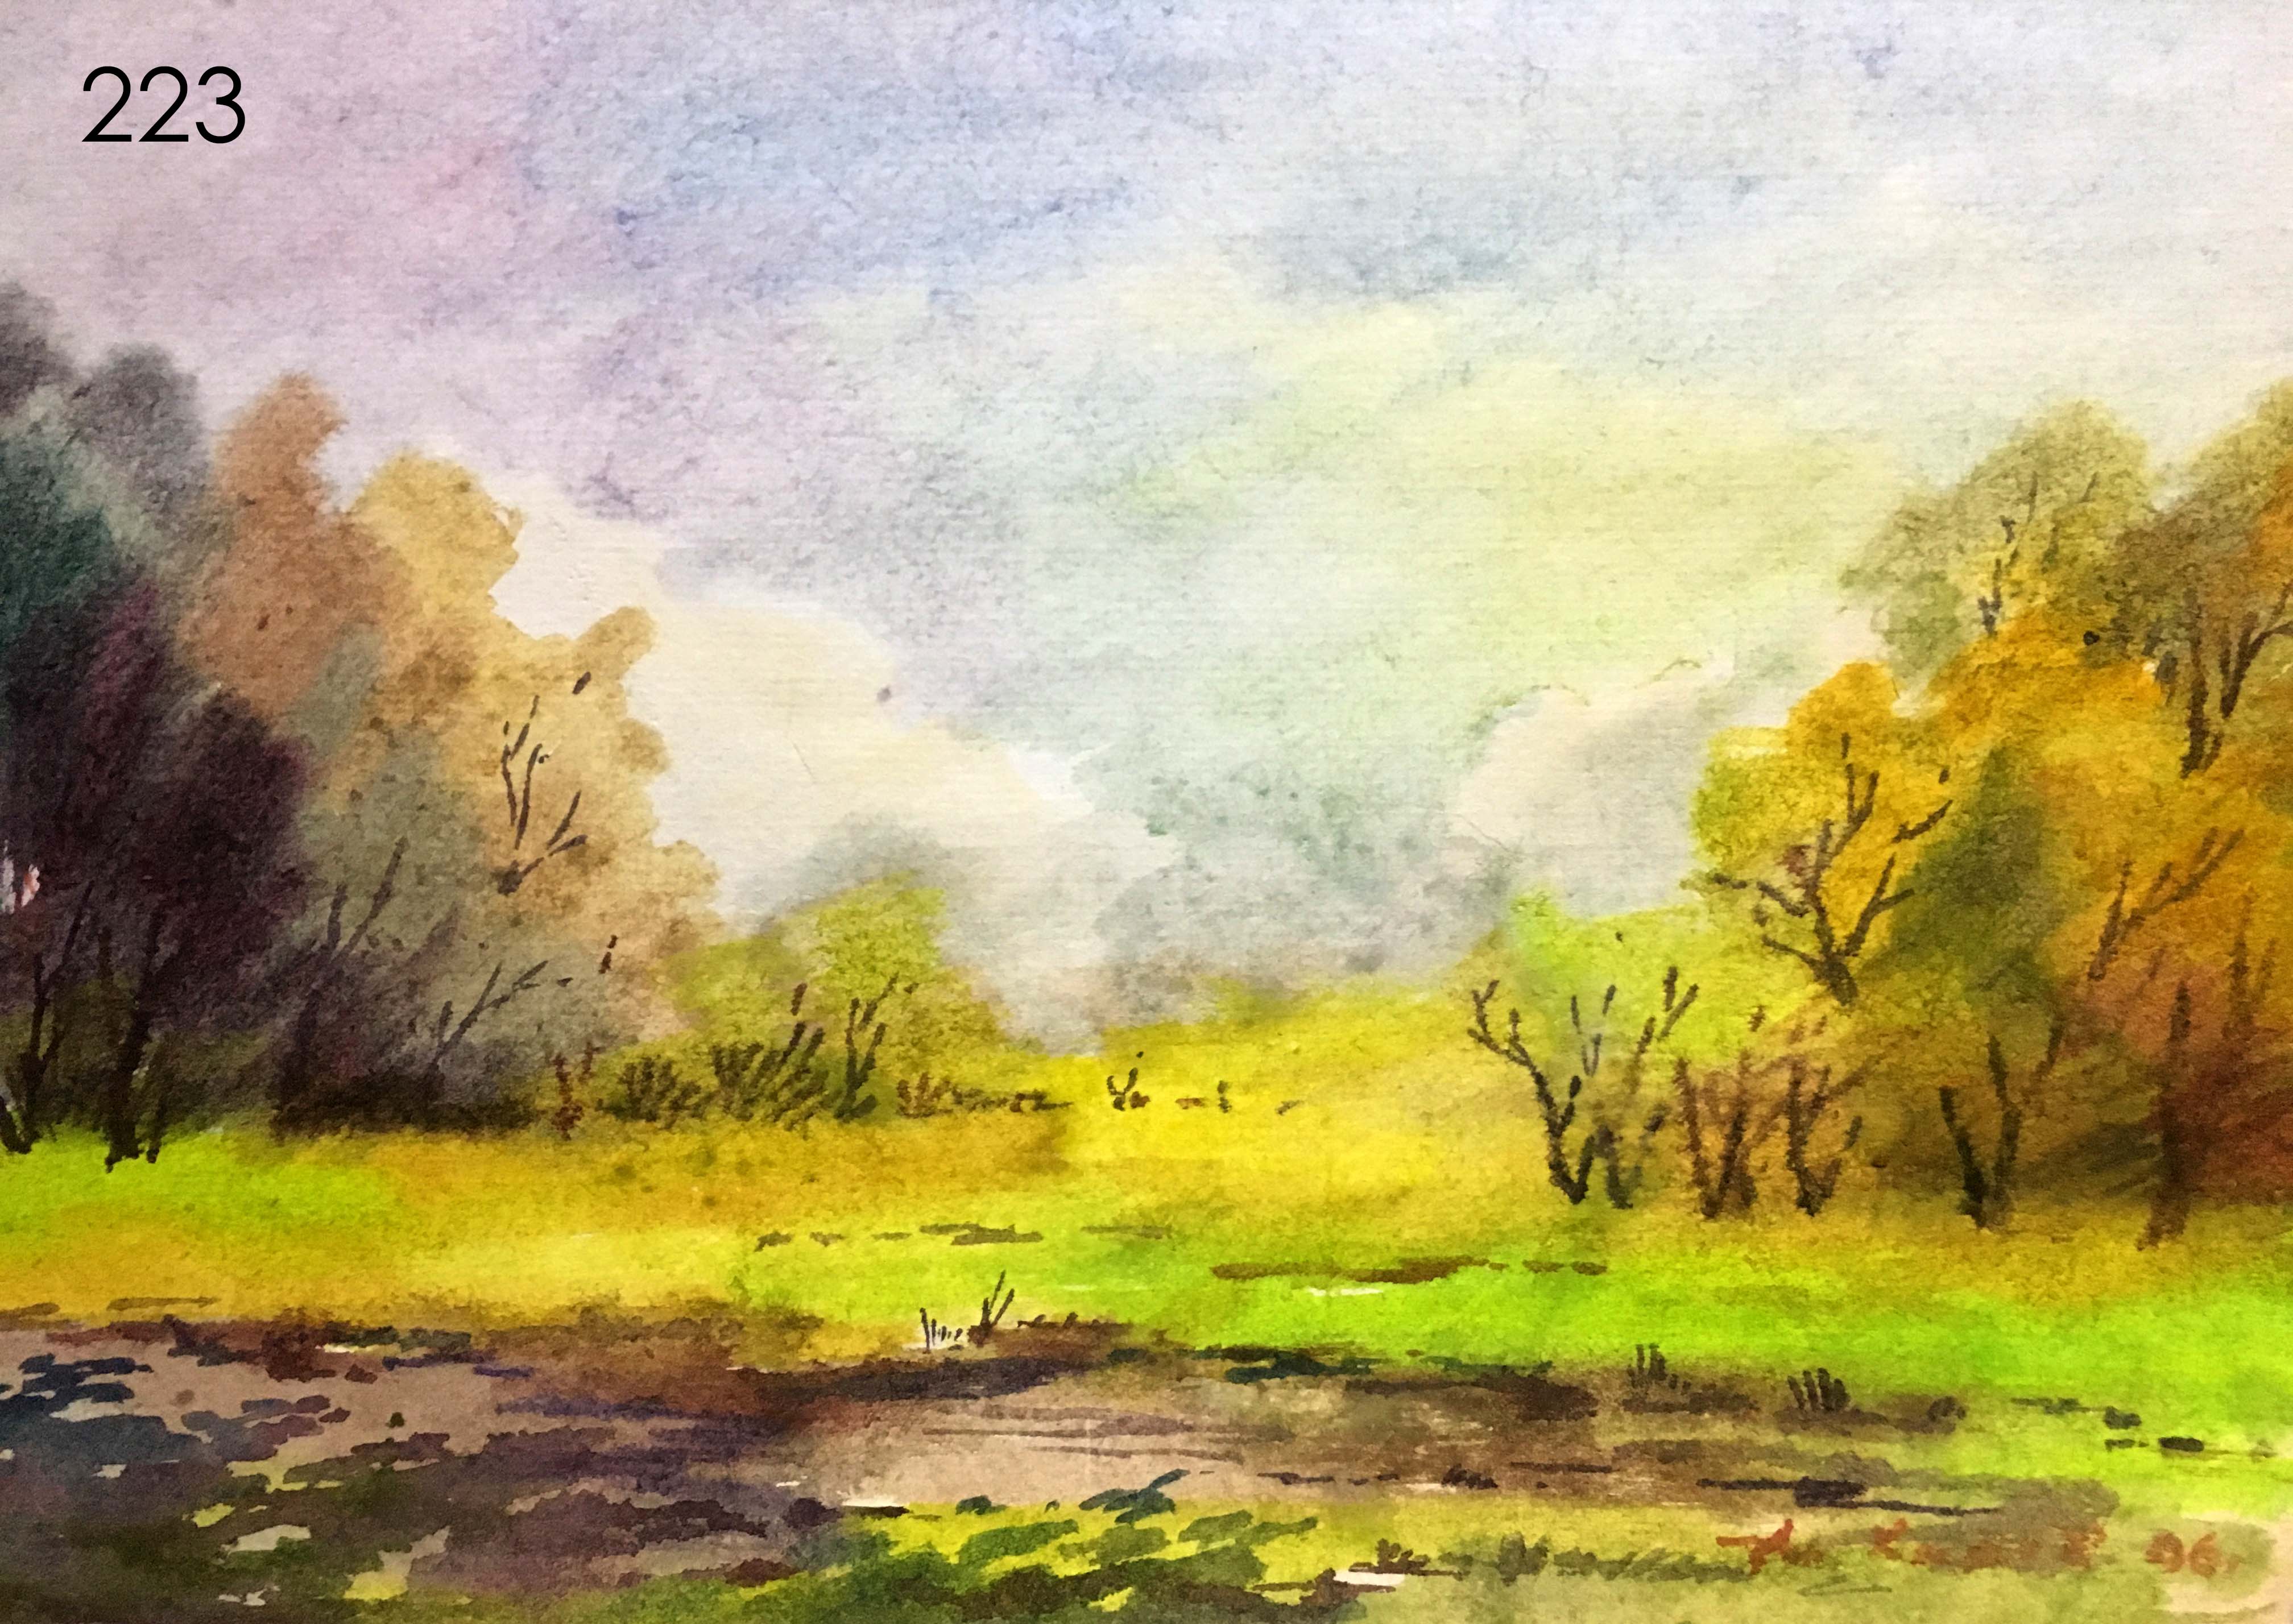 Summer landscape watercolor painting A. Horov